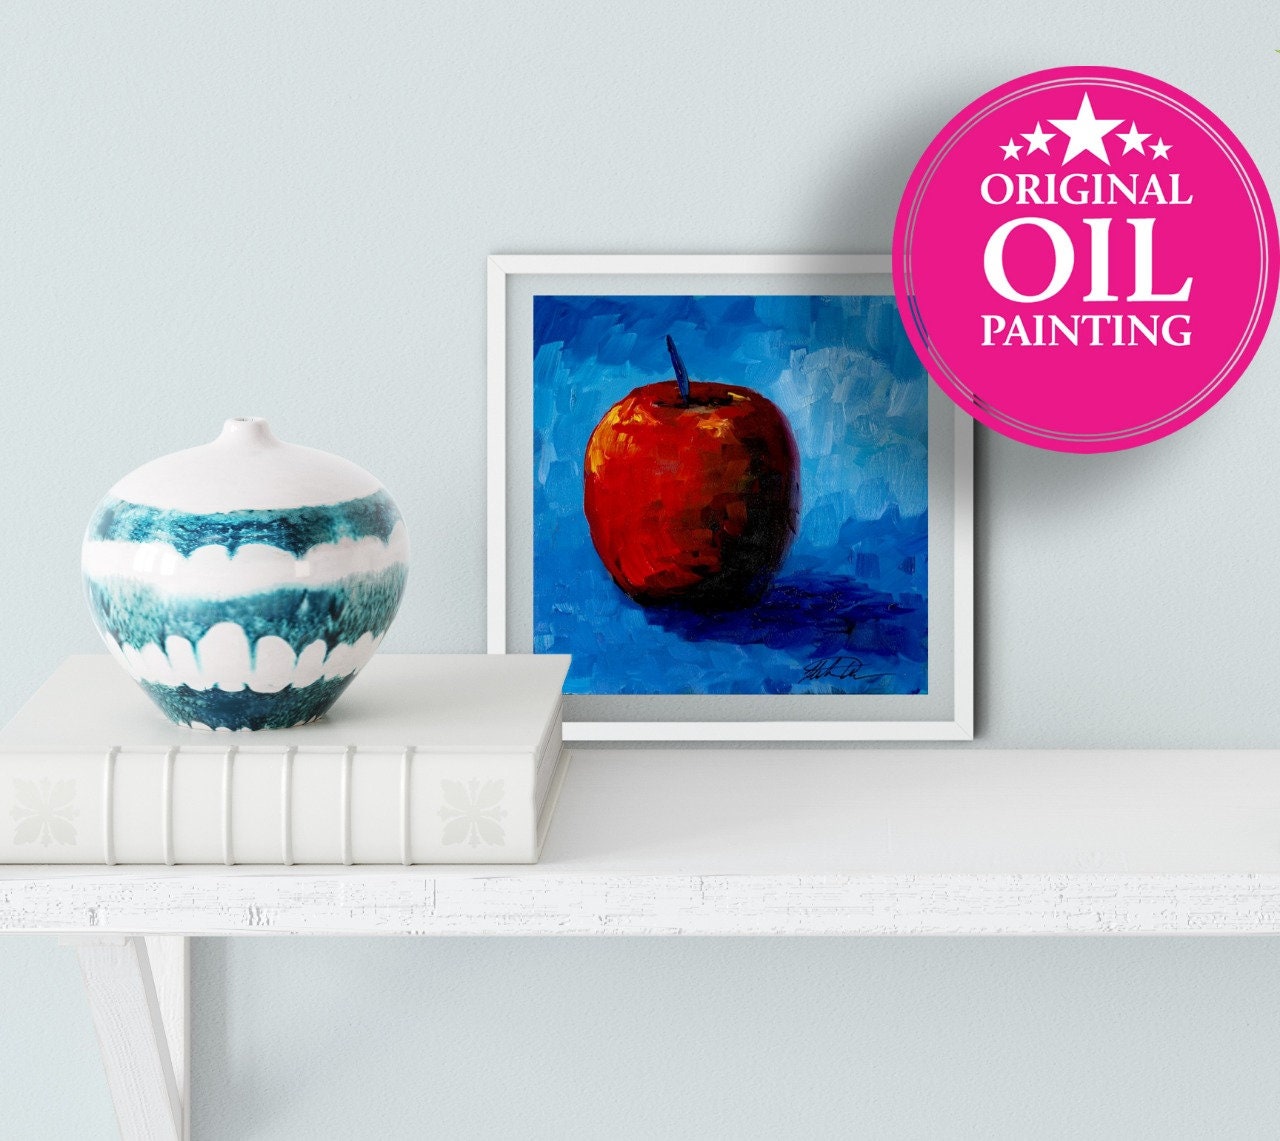 Original Oil Painting 6x6" Apple Artwork - Red and Vibrant Blue